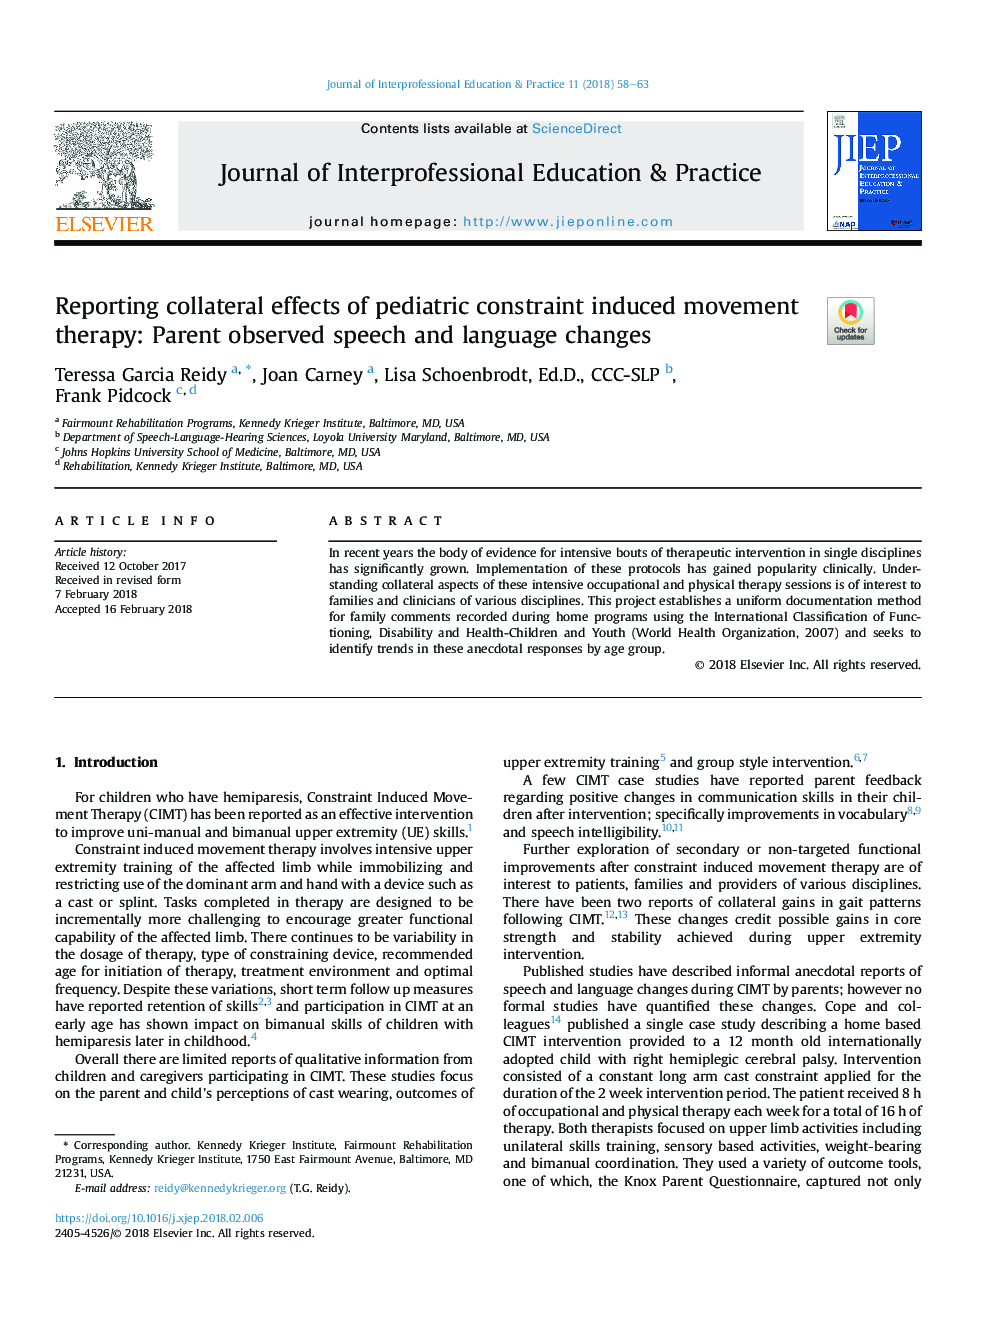 Reporting collateral effects of pediatric constraint induced movement therapy: Parent observed speech and language changes